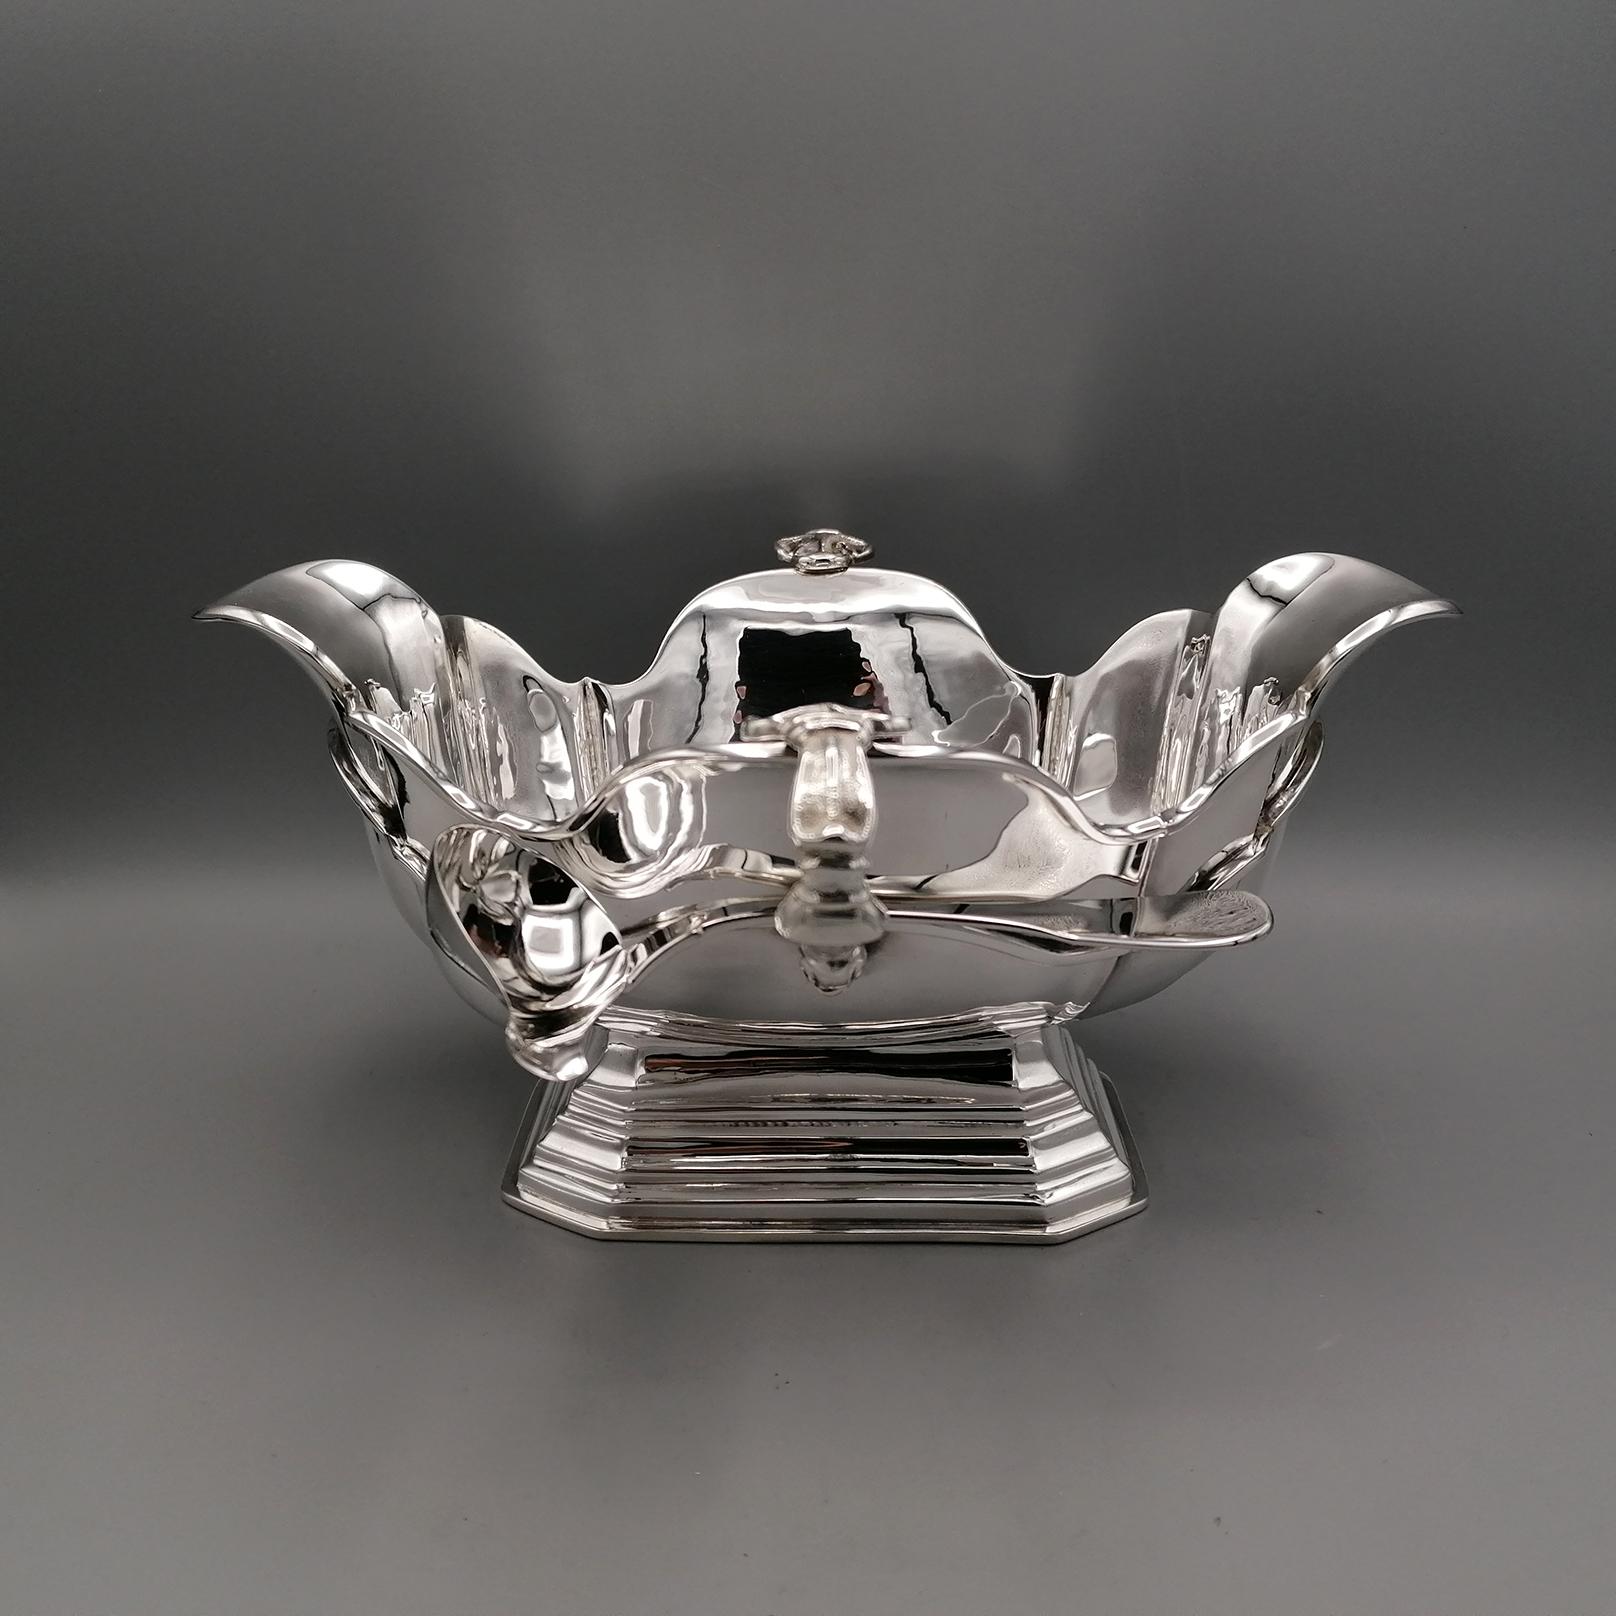 Italian gravy boat in solid 800 silver “Mauriziano” style.
The gravy boat was made entirely by hand in the CESA 1882 silverware factory located in Alessandria - Piedmont - Italy.
The body is oval, shaped and hammered. 
Silver wires have been welded